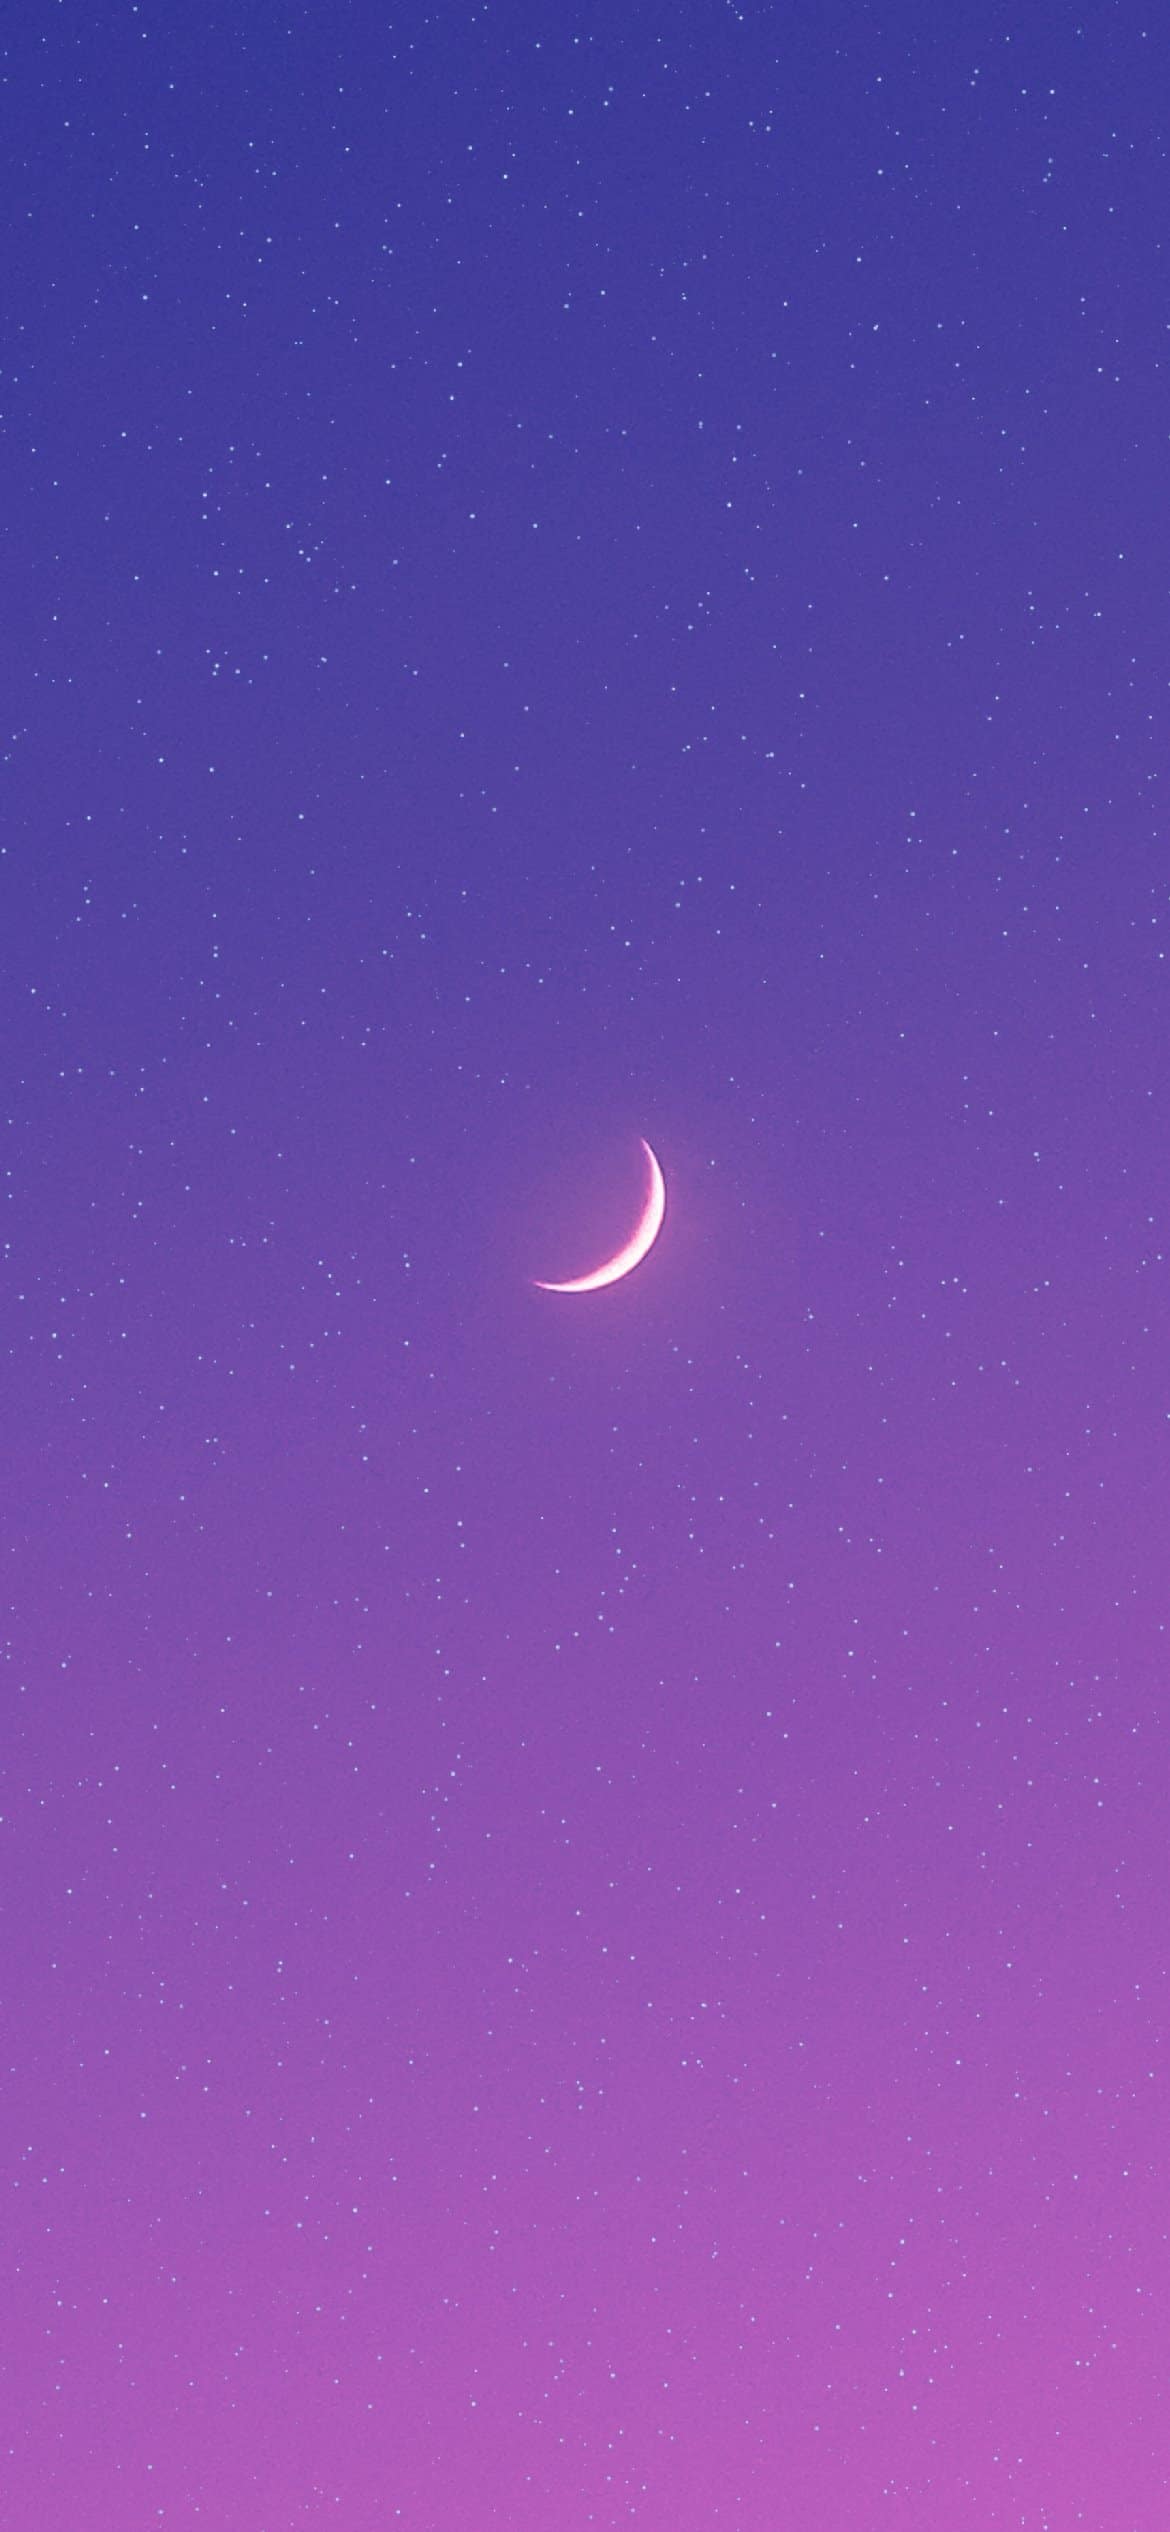 Free Purple Aesthetic Wallpaper Background Perfect For Your iPhone